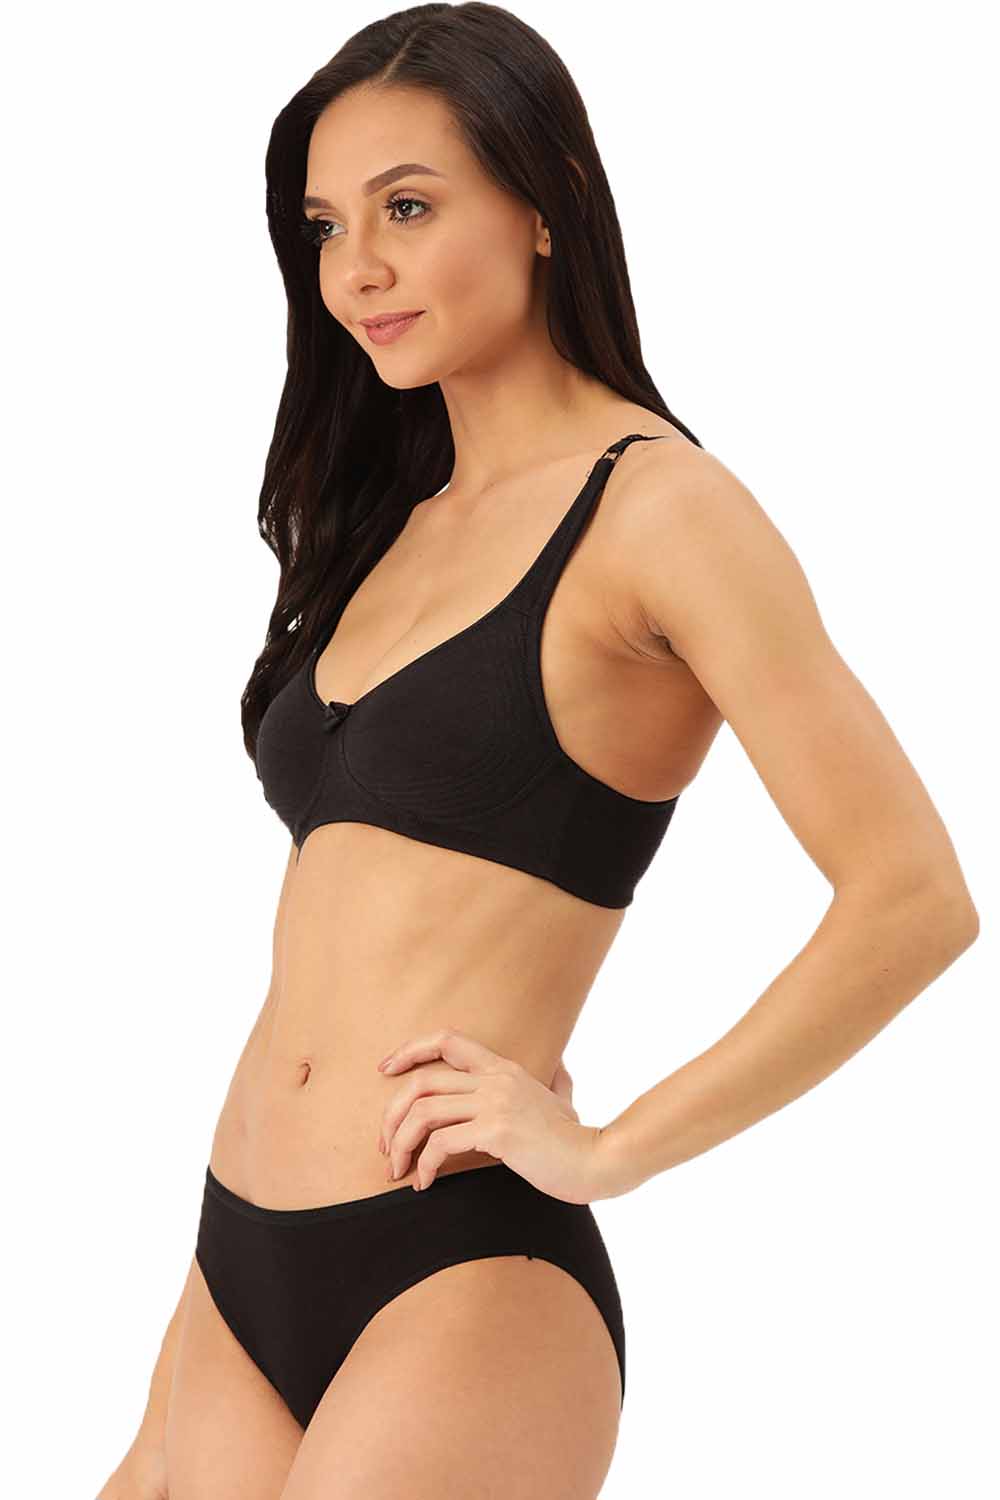 Black Bra and Panties Removed from the Top Stock Image - Image of bikini,  female: 214984631